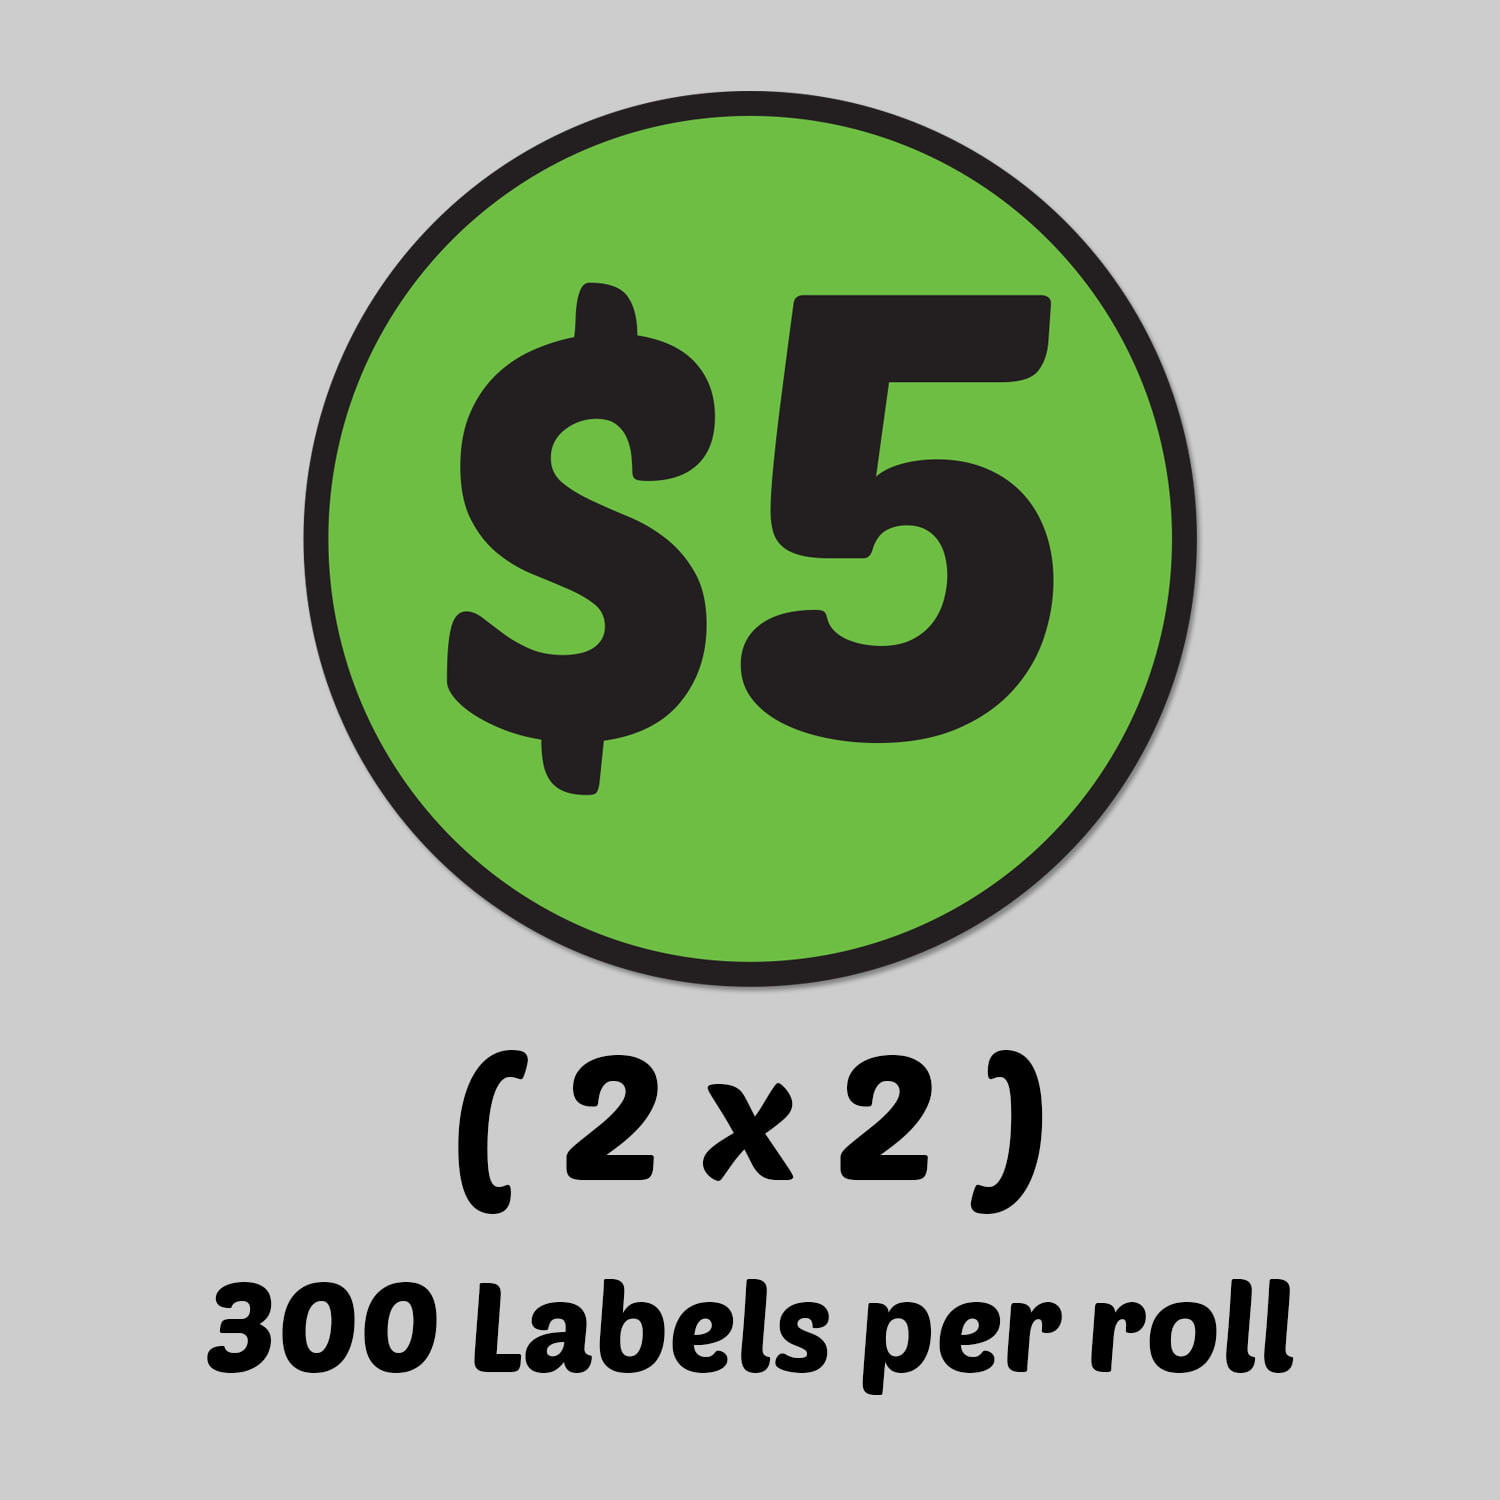 Five Dollar $5 Icon Price Labels 1000 each per roll size 1" Round Oval STICKERS 